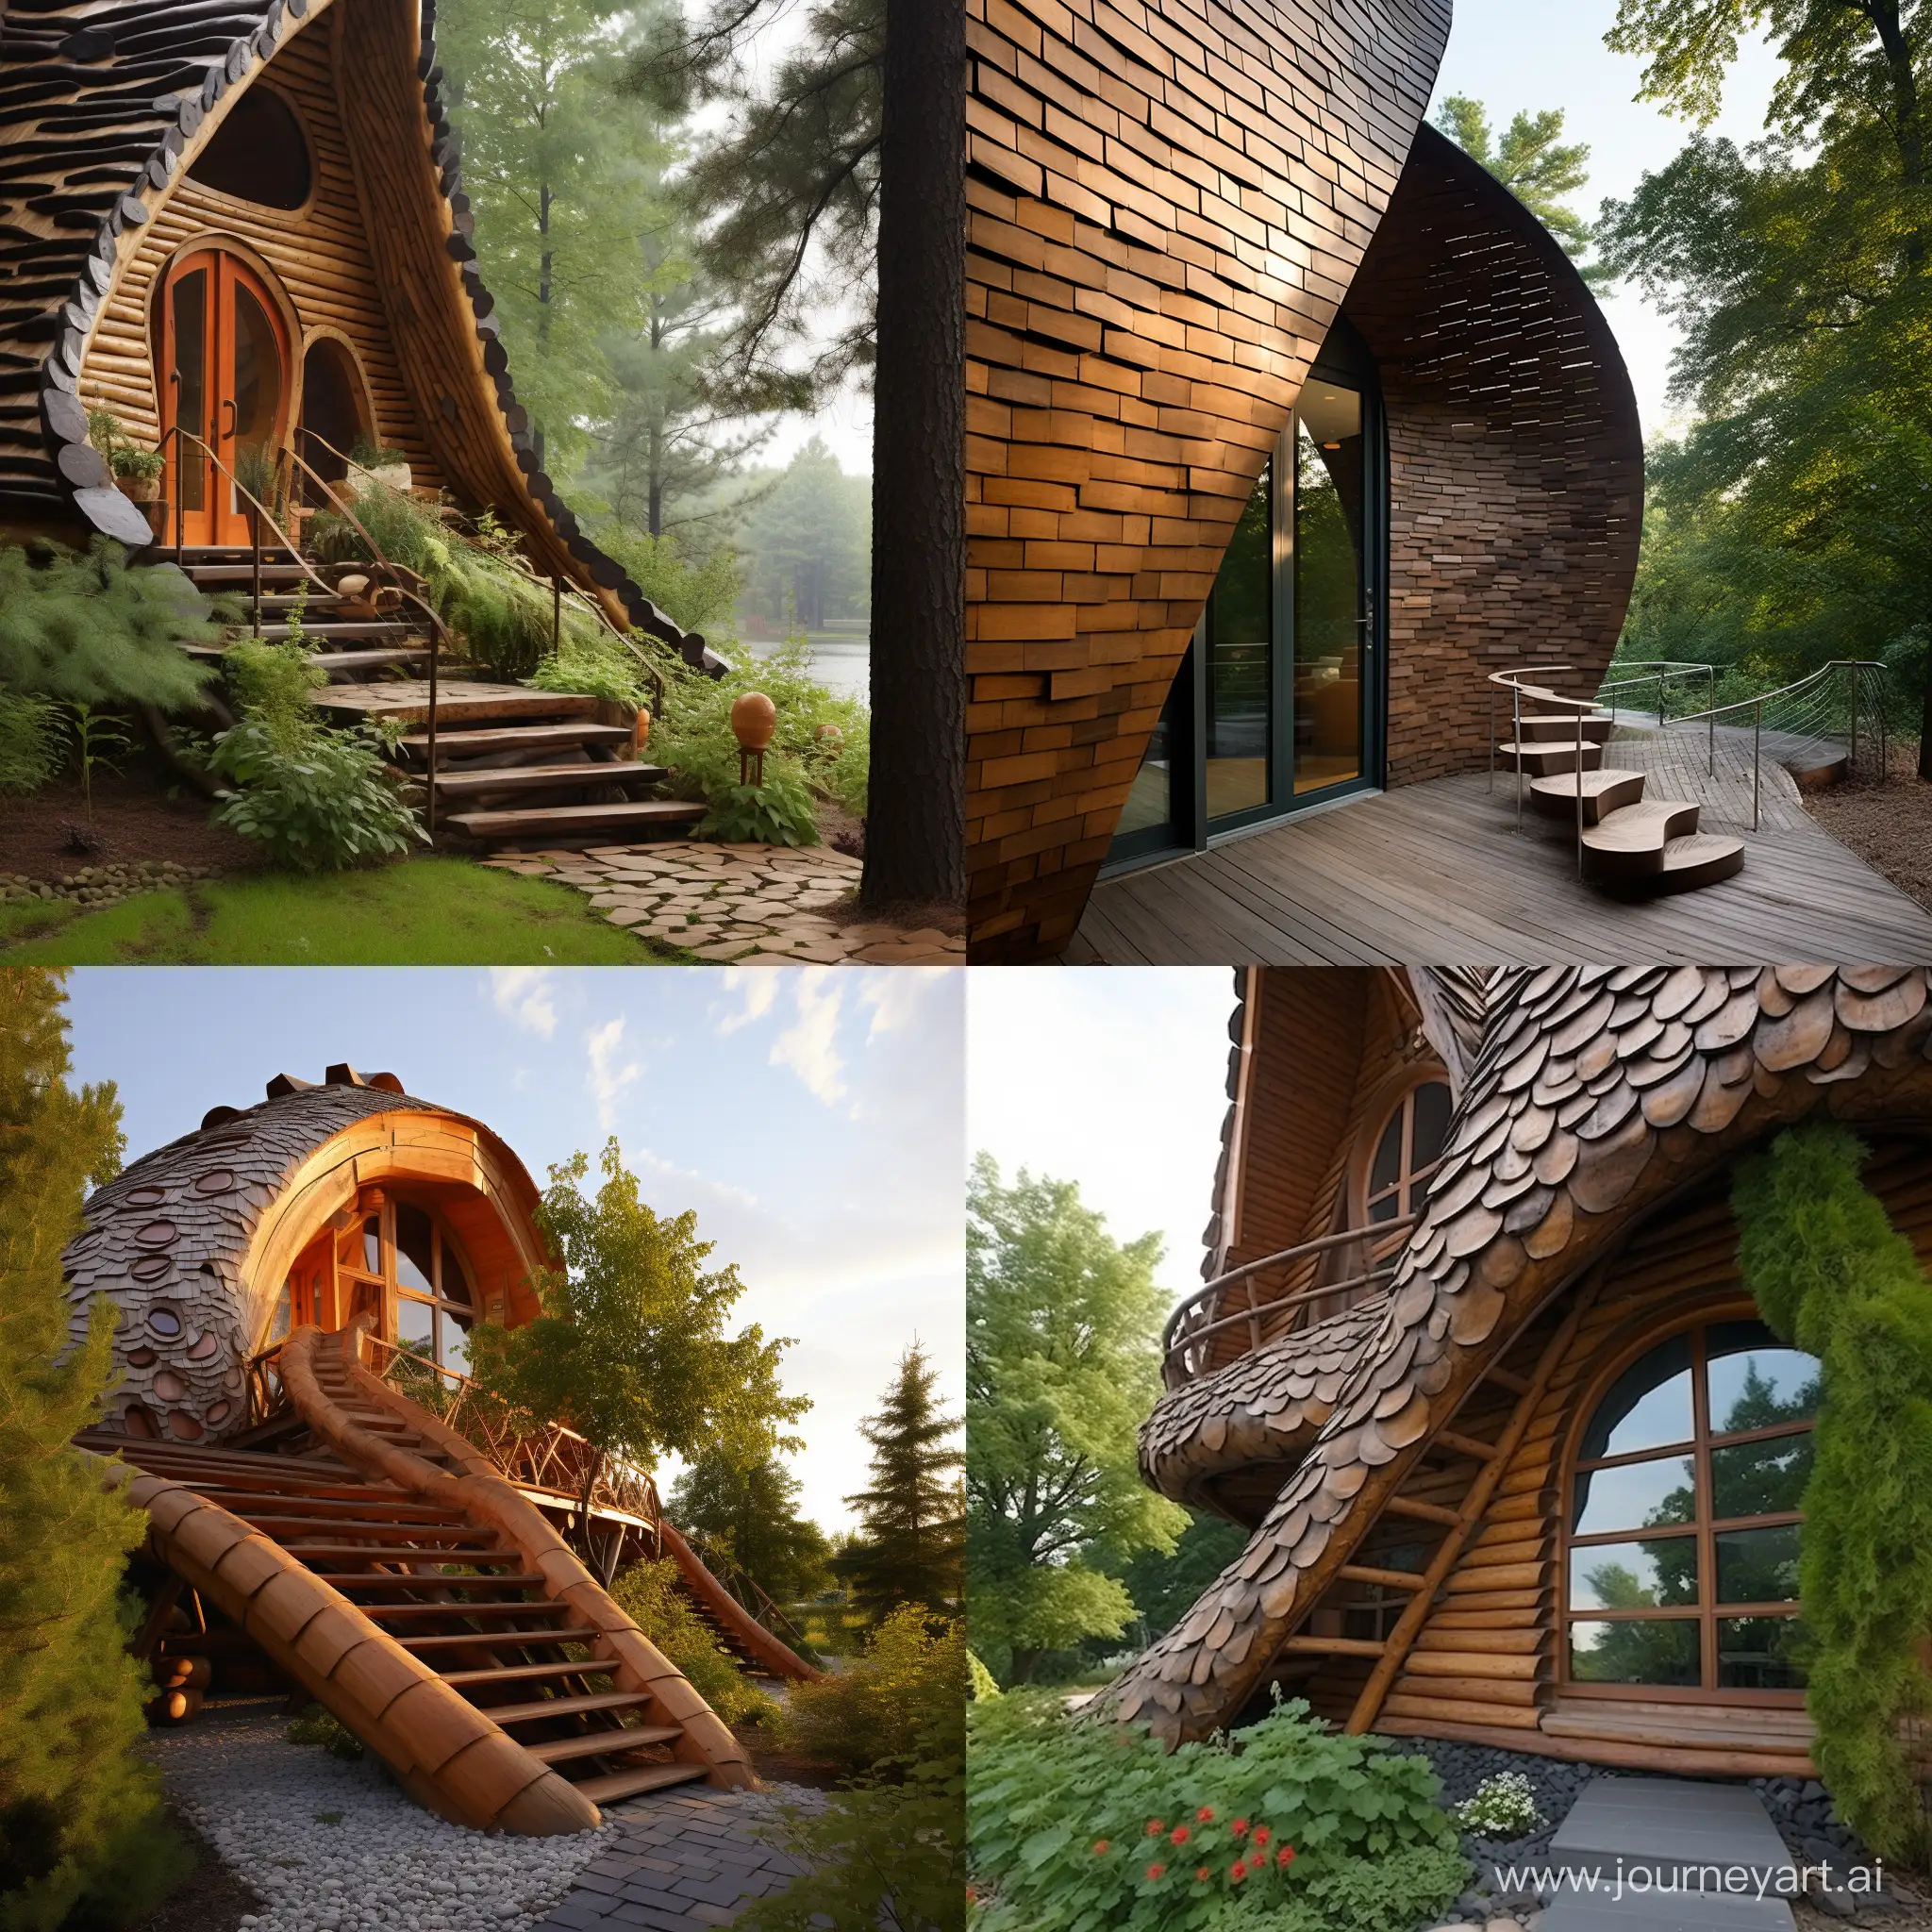 Rustic-Log-Shell-Exterior-with-Inclined-Ladder-Architectural-Harmony